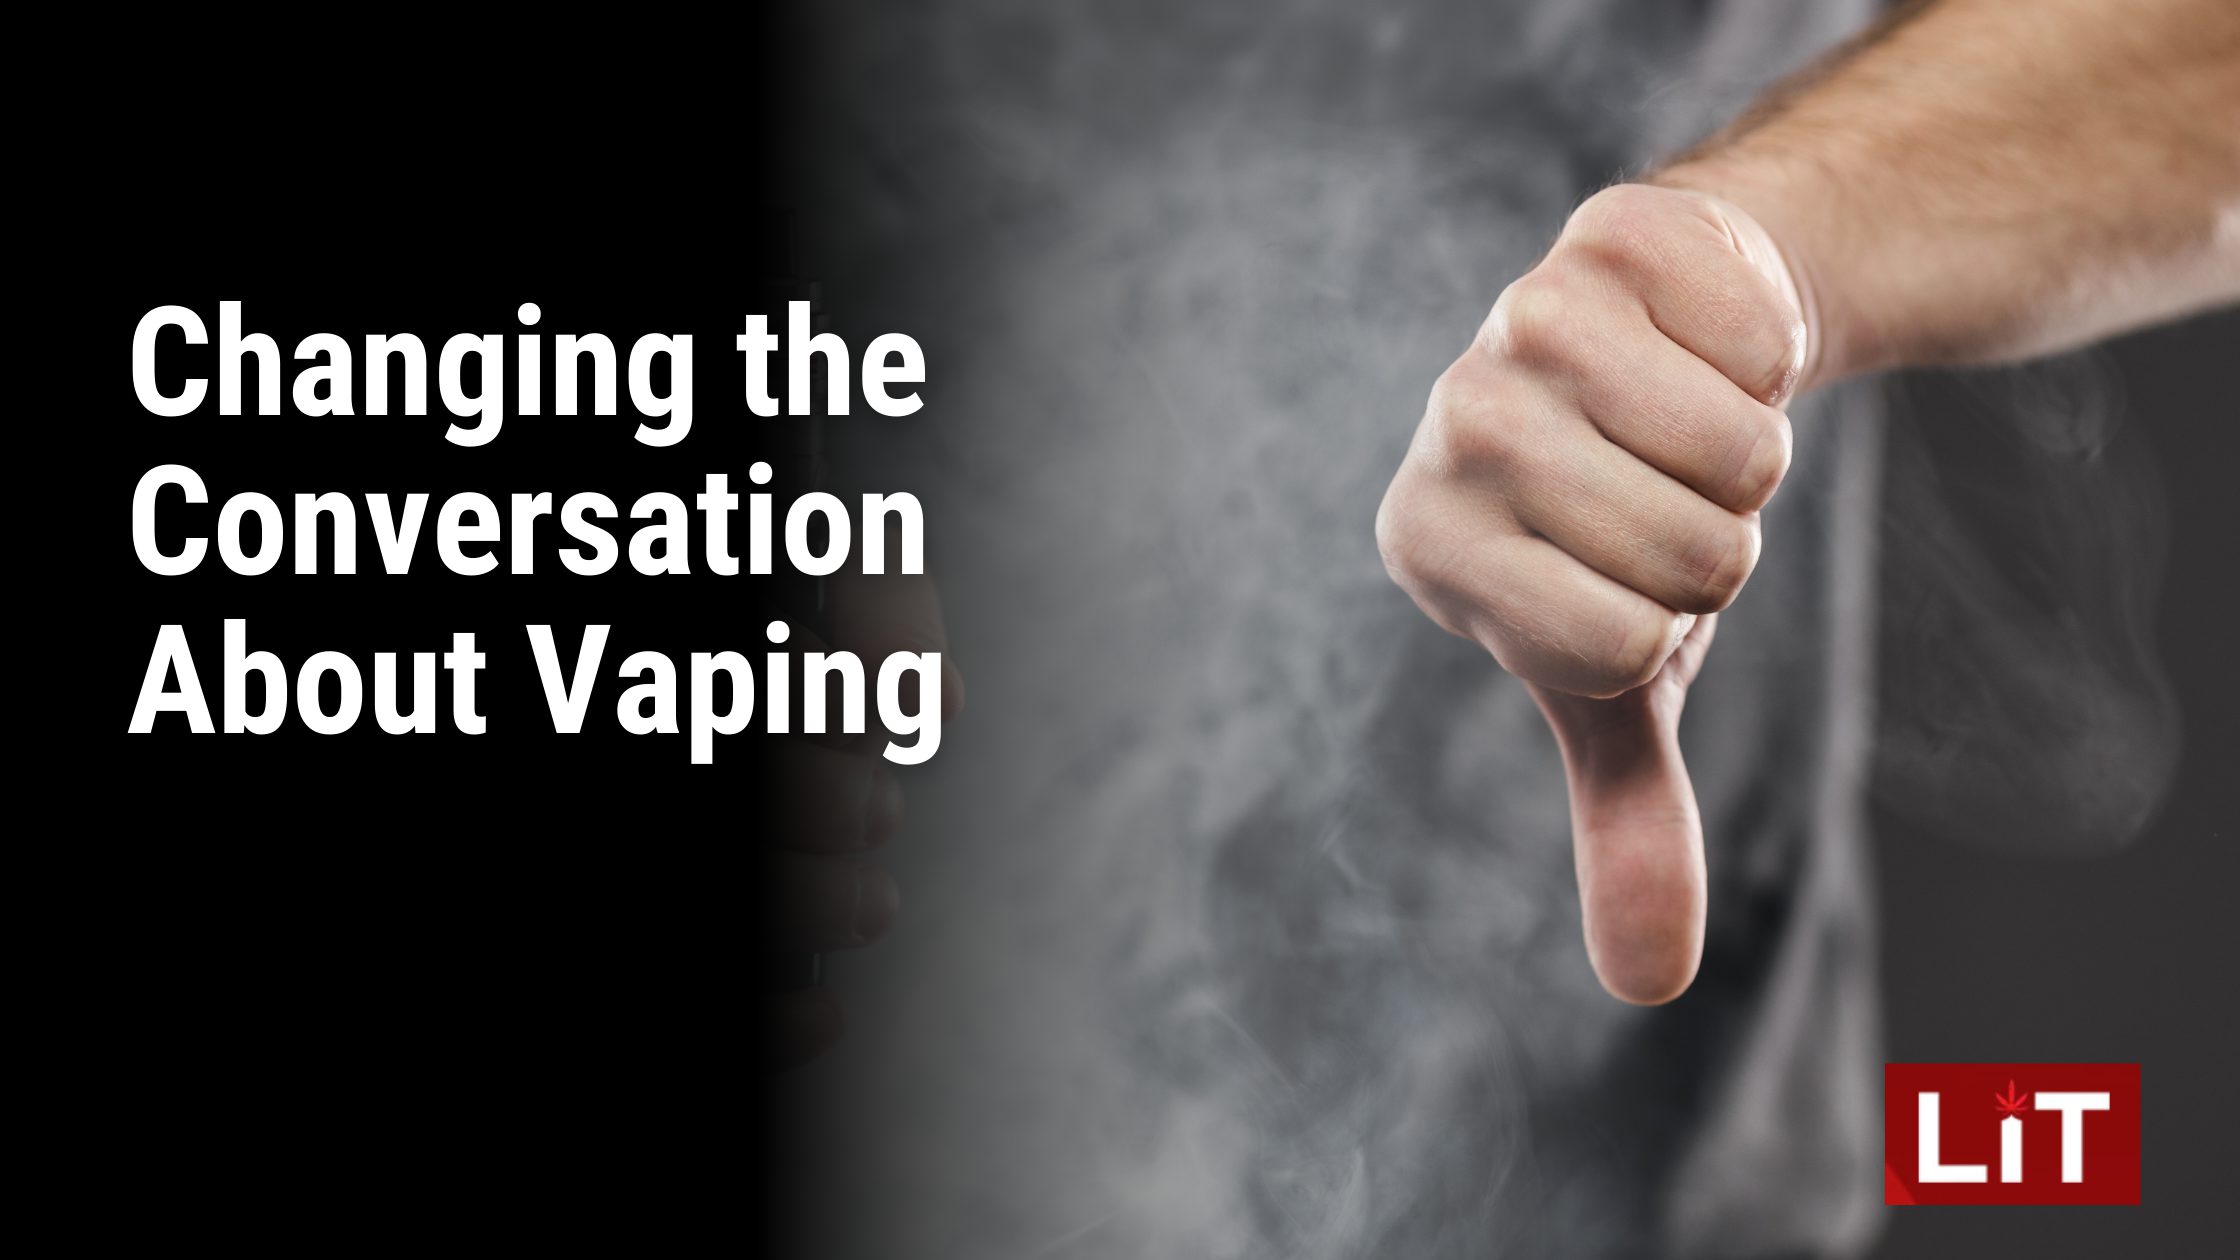 Changing the Conversation About Vaping